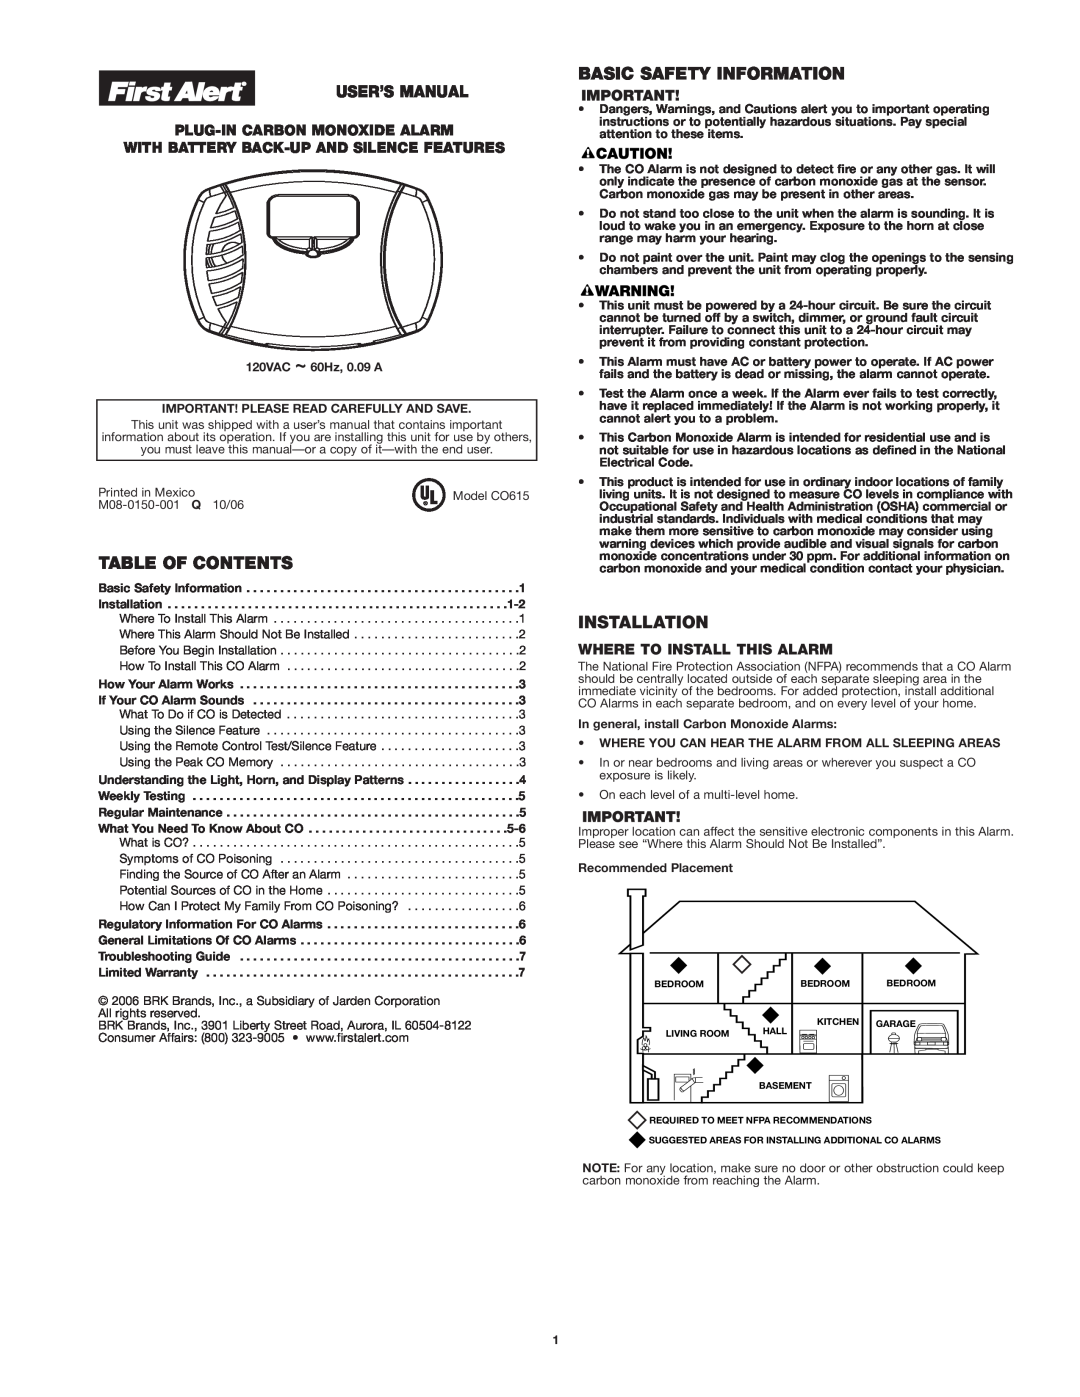 First Alert CO615 user manual Table Of Contents, Basic Safety Information, Installation, Plug-Incarbon Monoxide Alarm 